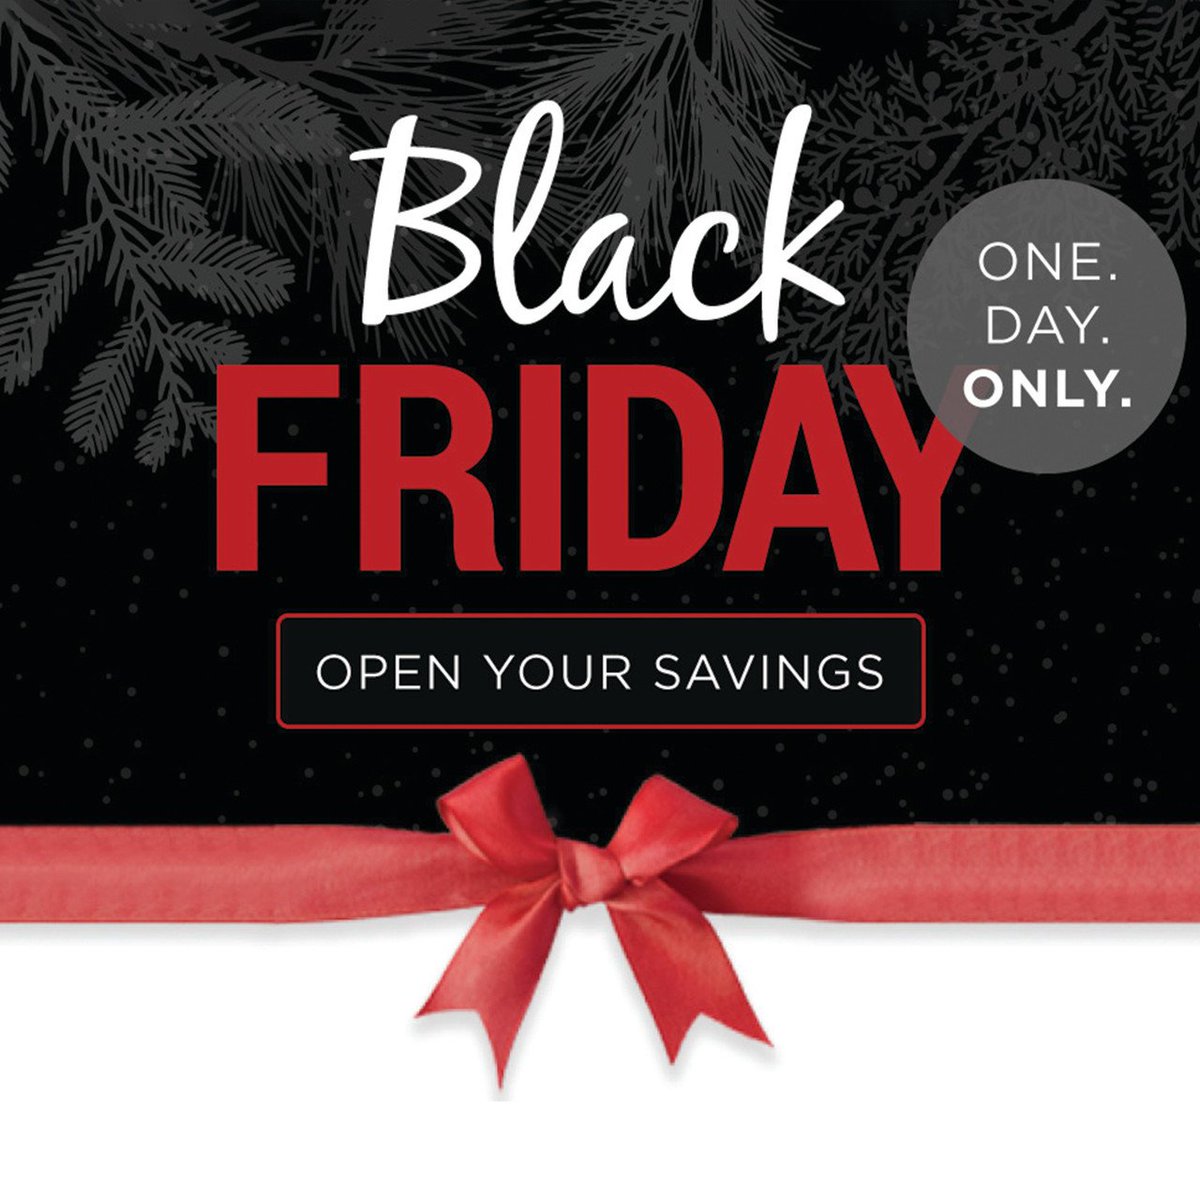 Deseret Book On Twitter Shop All Our Black Friday Deals Today